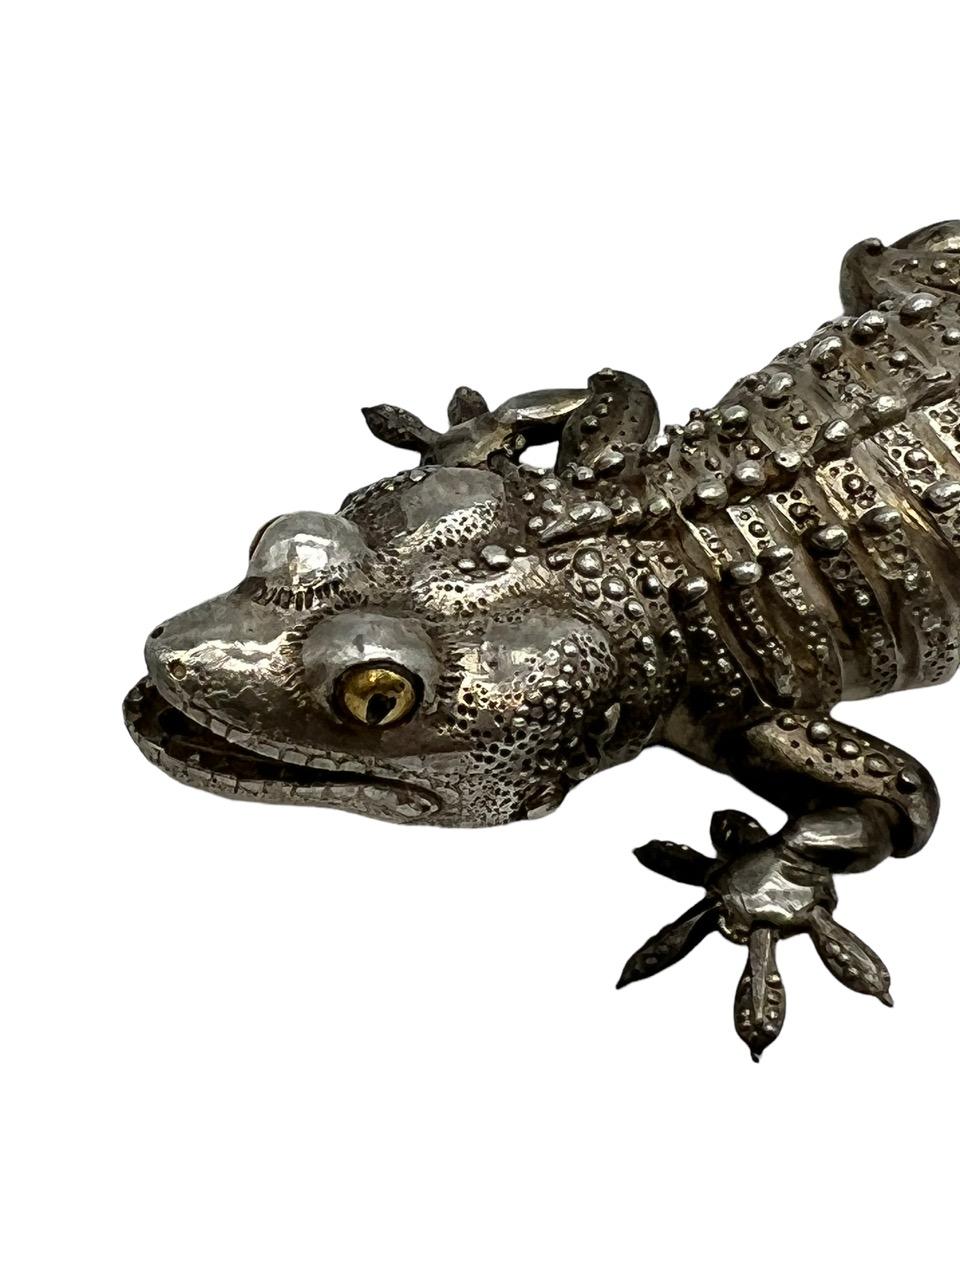 Oleg Konstantinov Fully Articulated Gecko Made of Sterling Silver In Good Condition For Sale In North Miami, FL